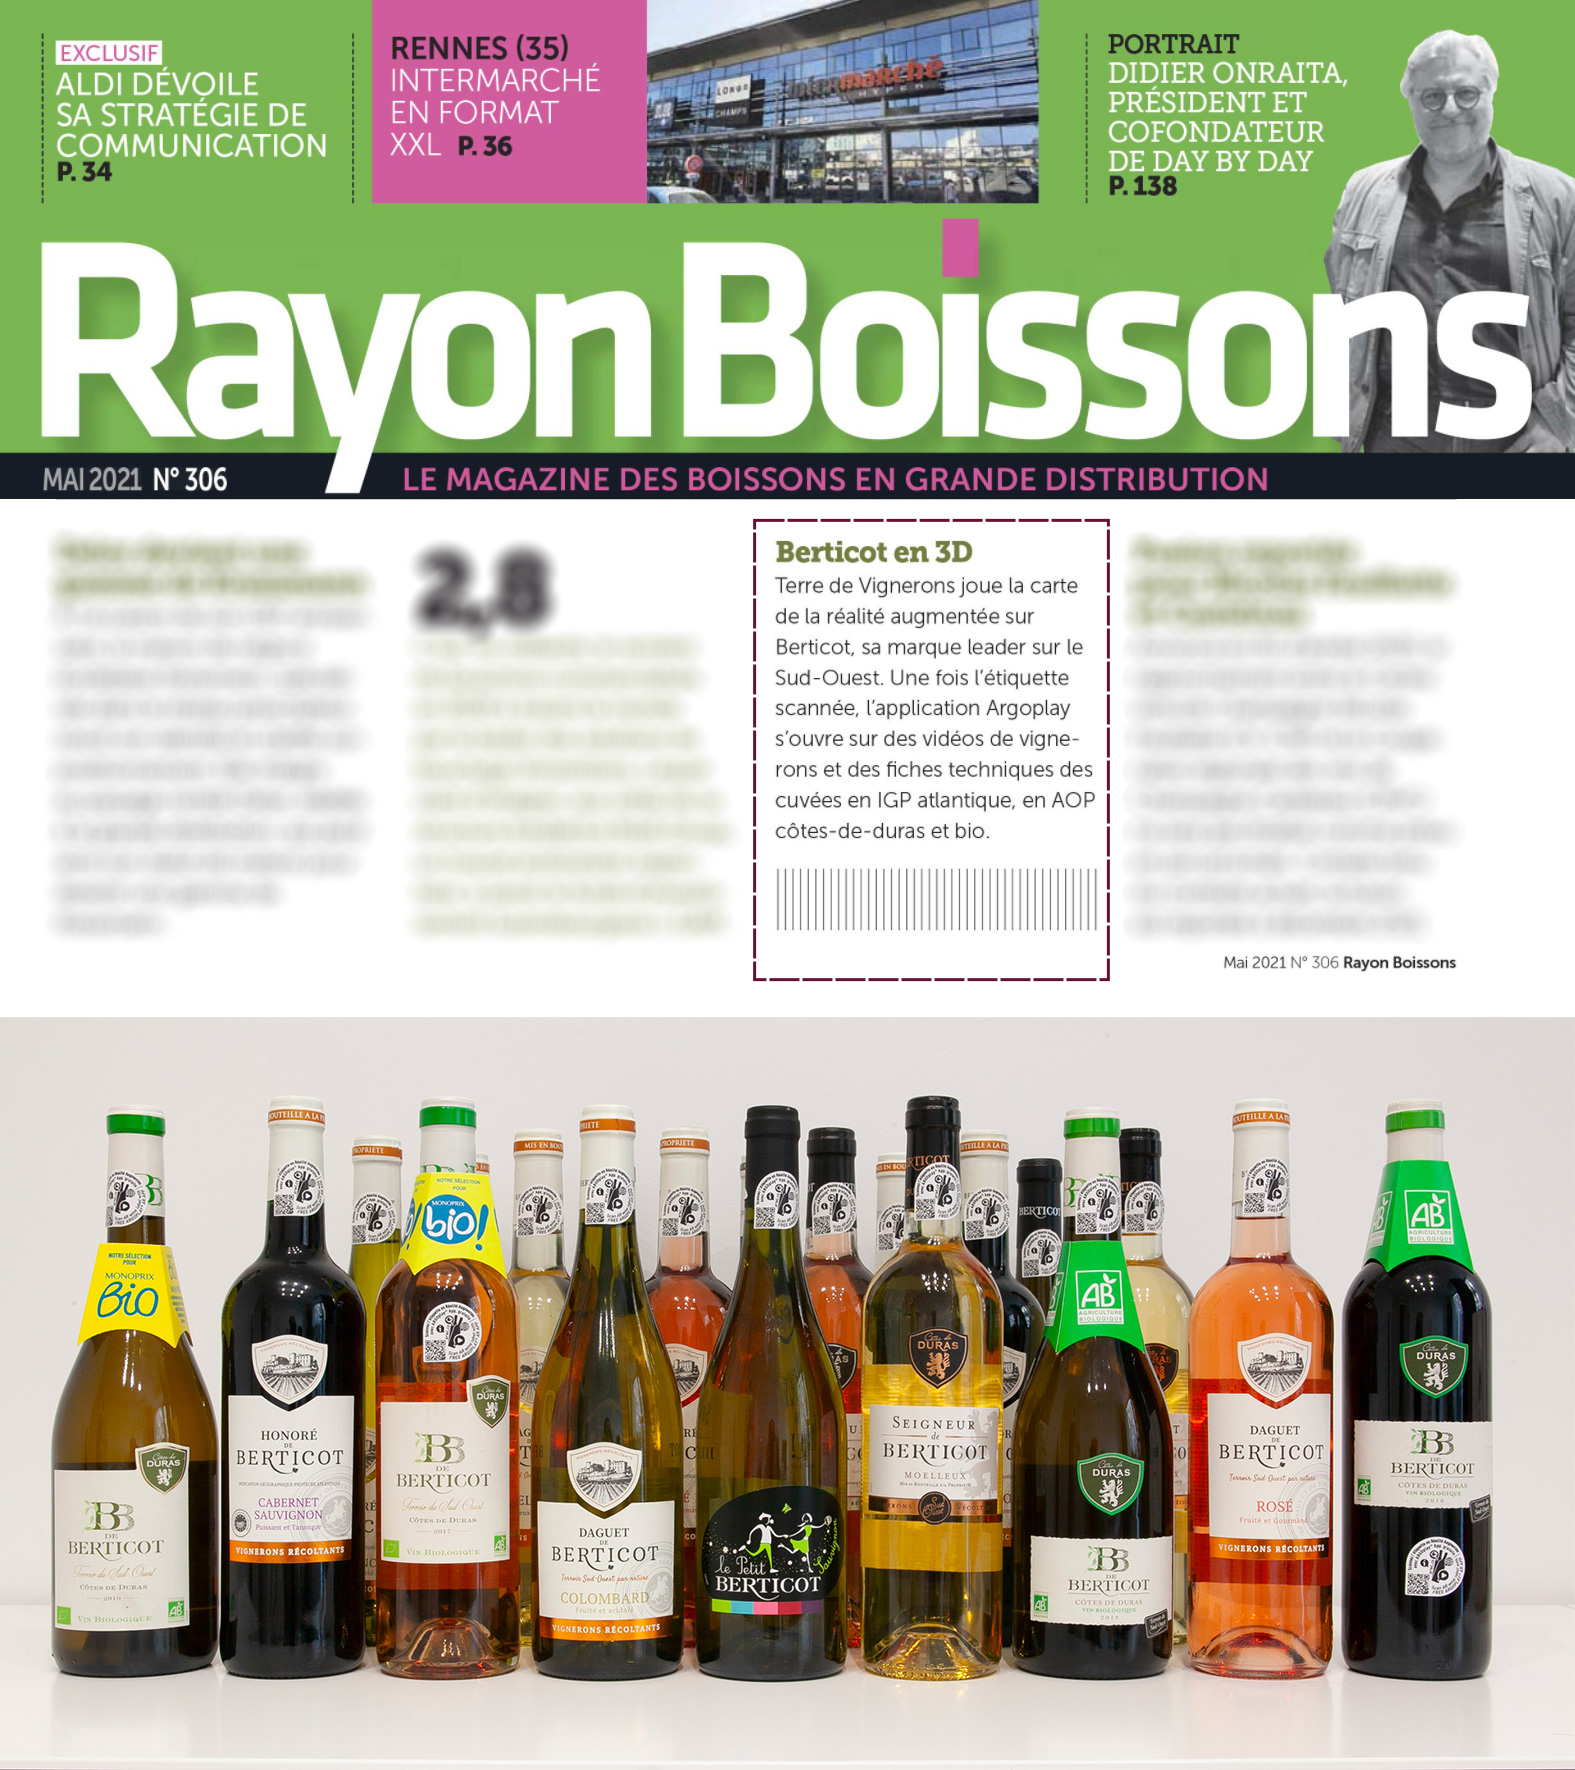 Rayon Boissons N ° 306 May 2021 and 3D labels for Berticot wines